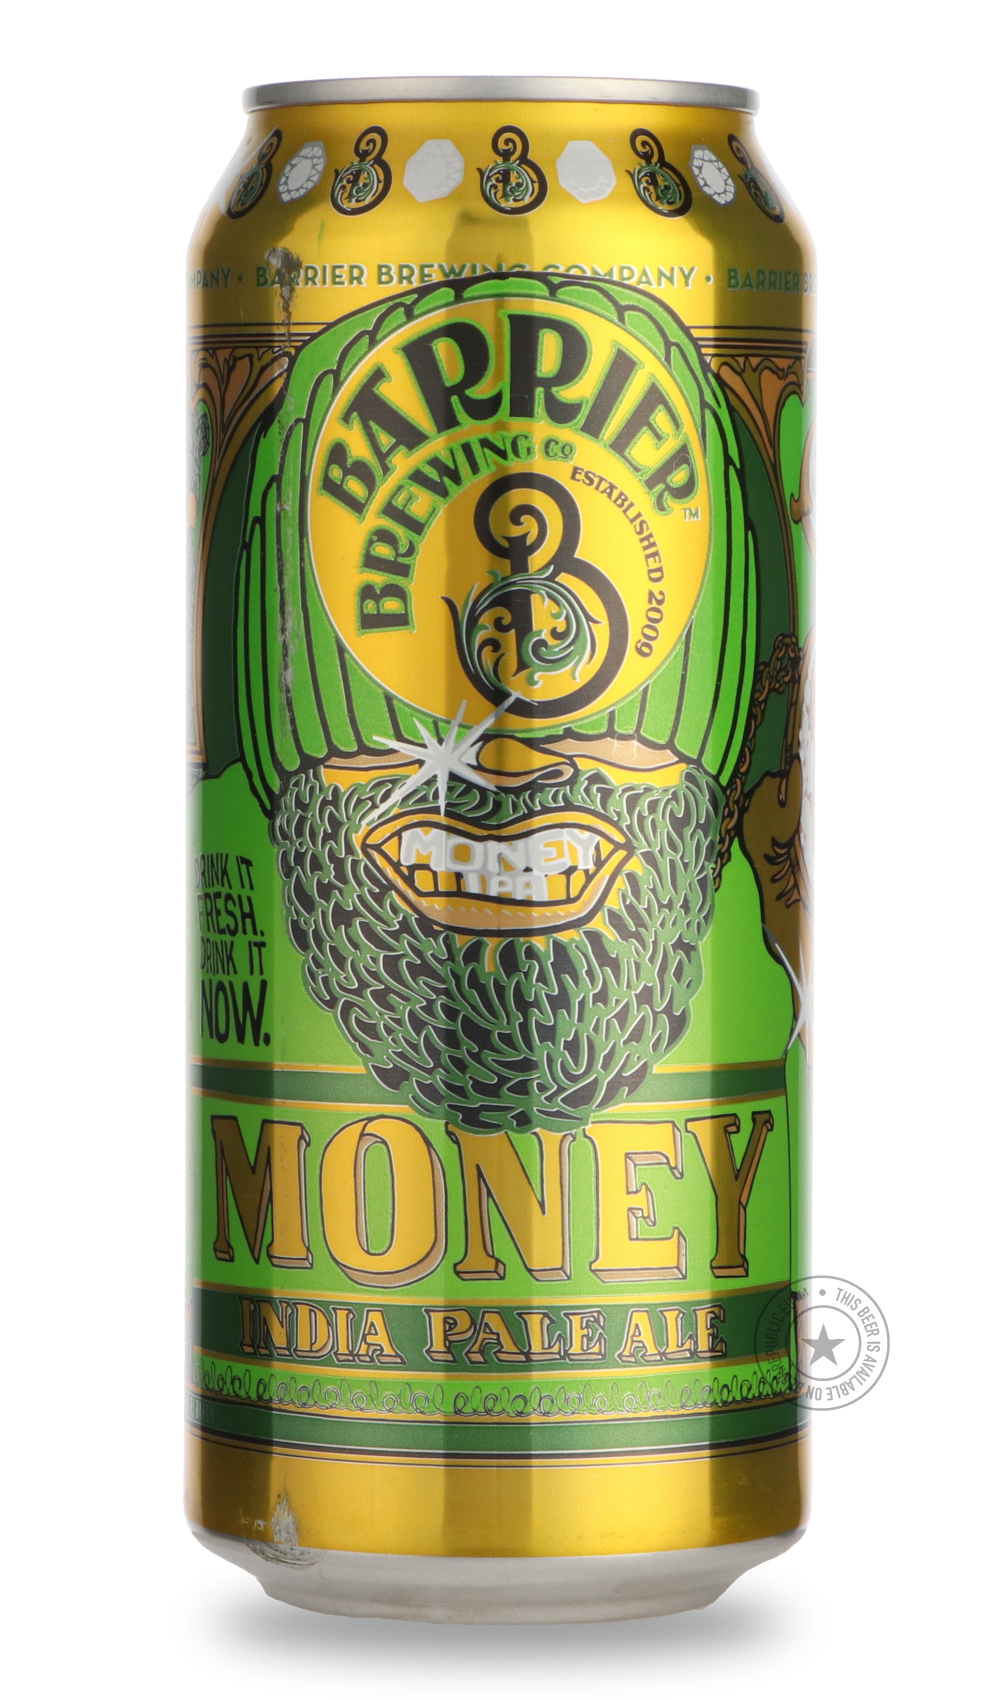 -Barrier- Money-IPA- Only @ Beer Republic - The best online beer store for American & Canadian craft beer - Buy beer online from the USA and Canada - Bier online kopen - Amerikaans bier kopen - Craft beer store - Craft beer kopen - Amerikanisch bier kaufen - Bier online kaufen - Acheter biere online - IPA - Stout - Porter - New England IPA - Hazy IPA - Imperial Stout - Barrel Aged - Barrel Aged Imperial Stout - Brown - Dark beer - Blond - Blonde - Pilsner - Lager - Wheat - Weizen - Amber - Barley Wine - Qua